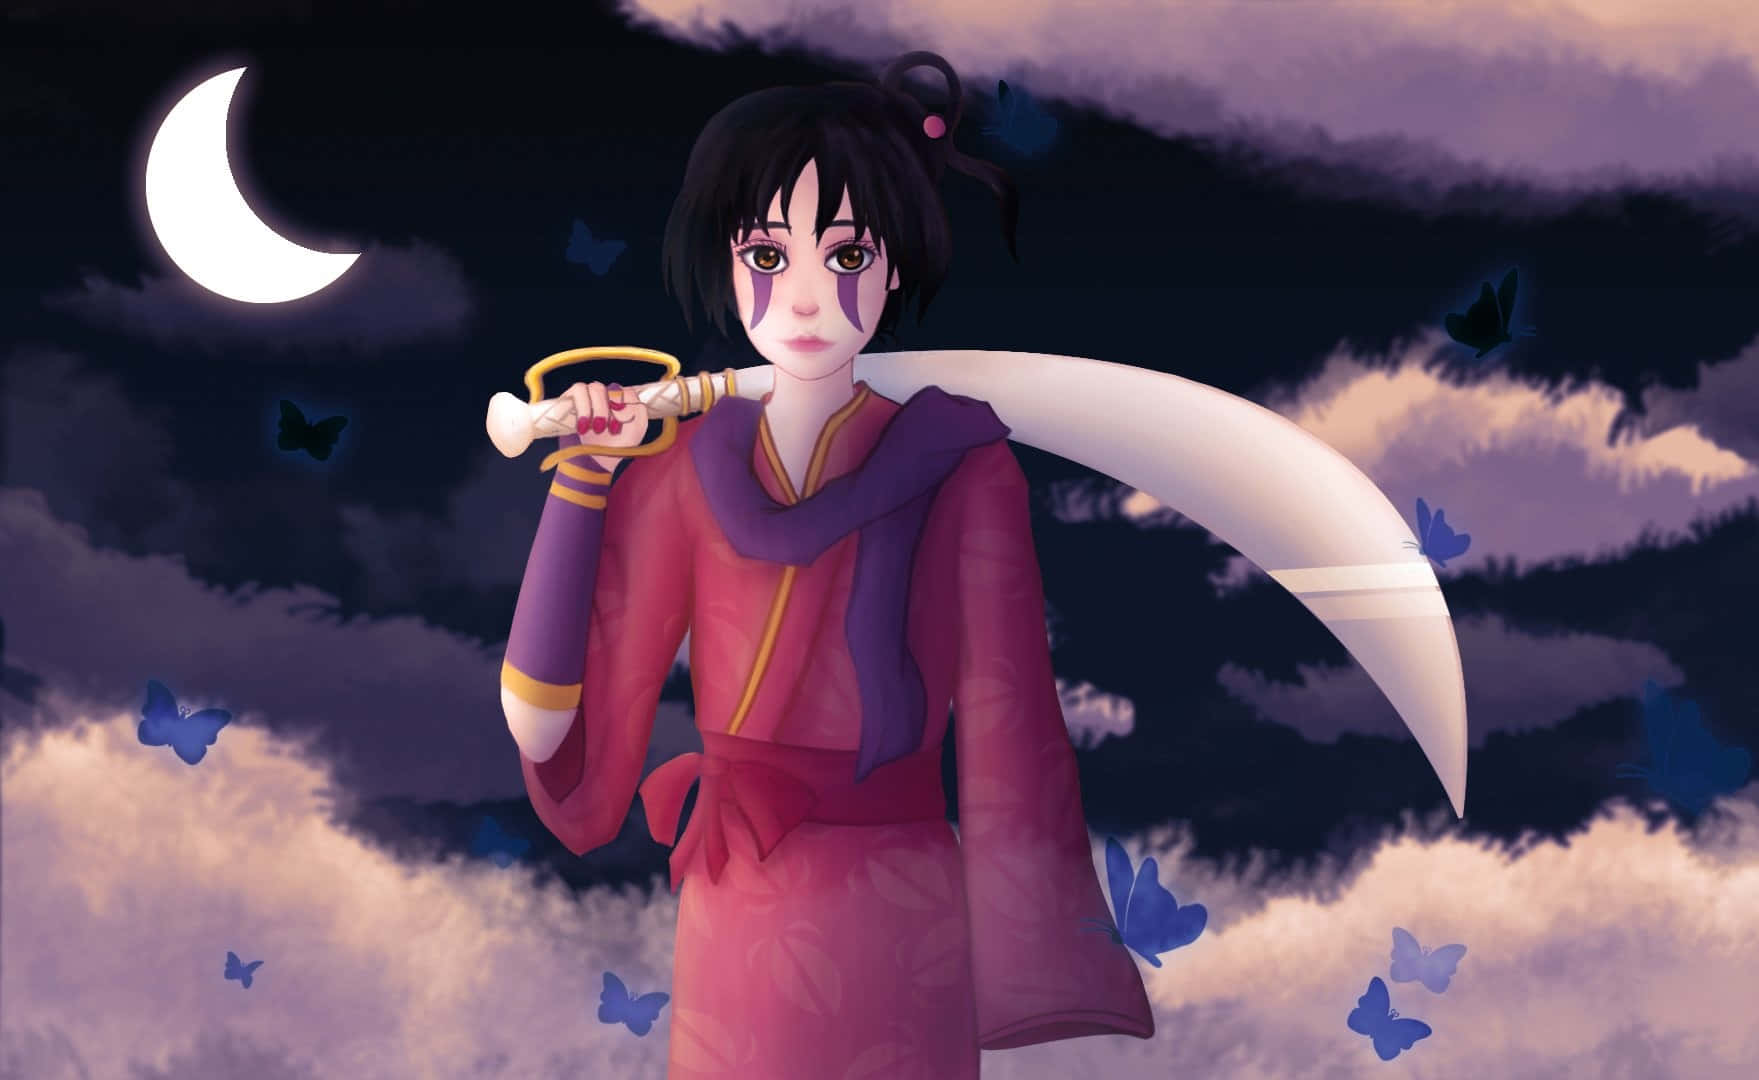 Amazing illustration of Jakotsu, a character from the Inuyasha anime series. Wallpaper